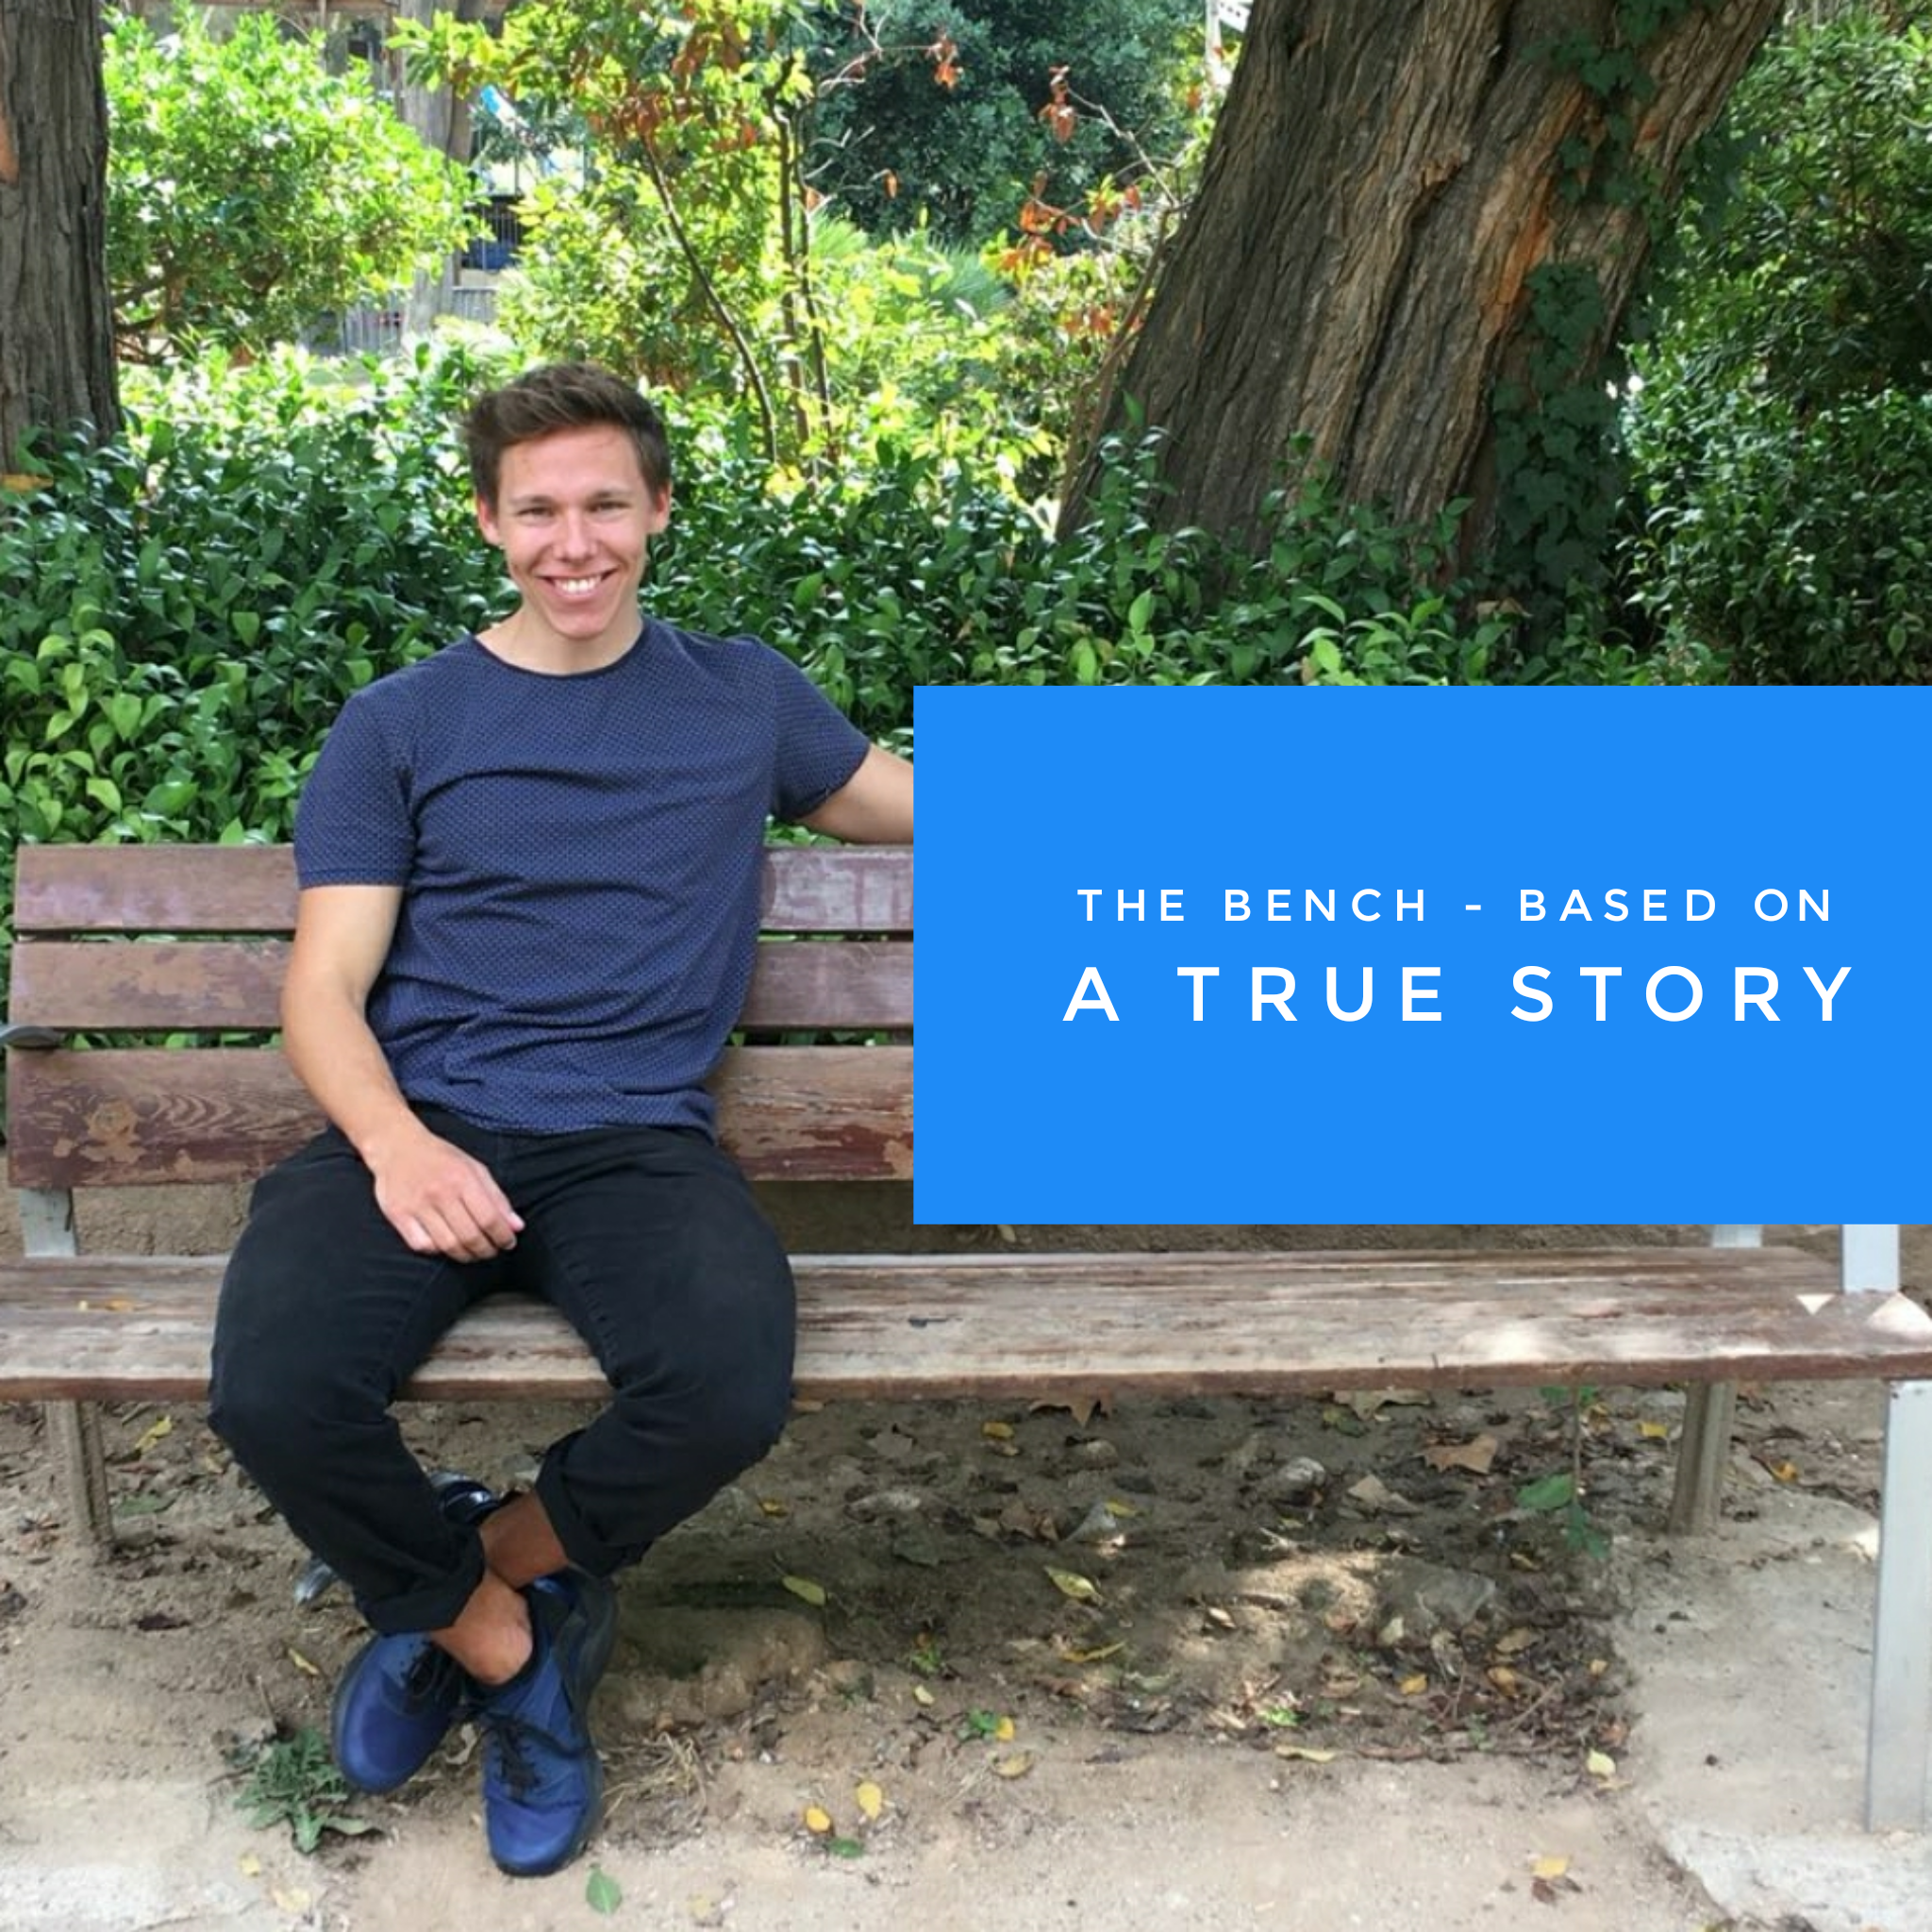 The bench – based on a true story